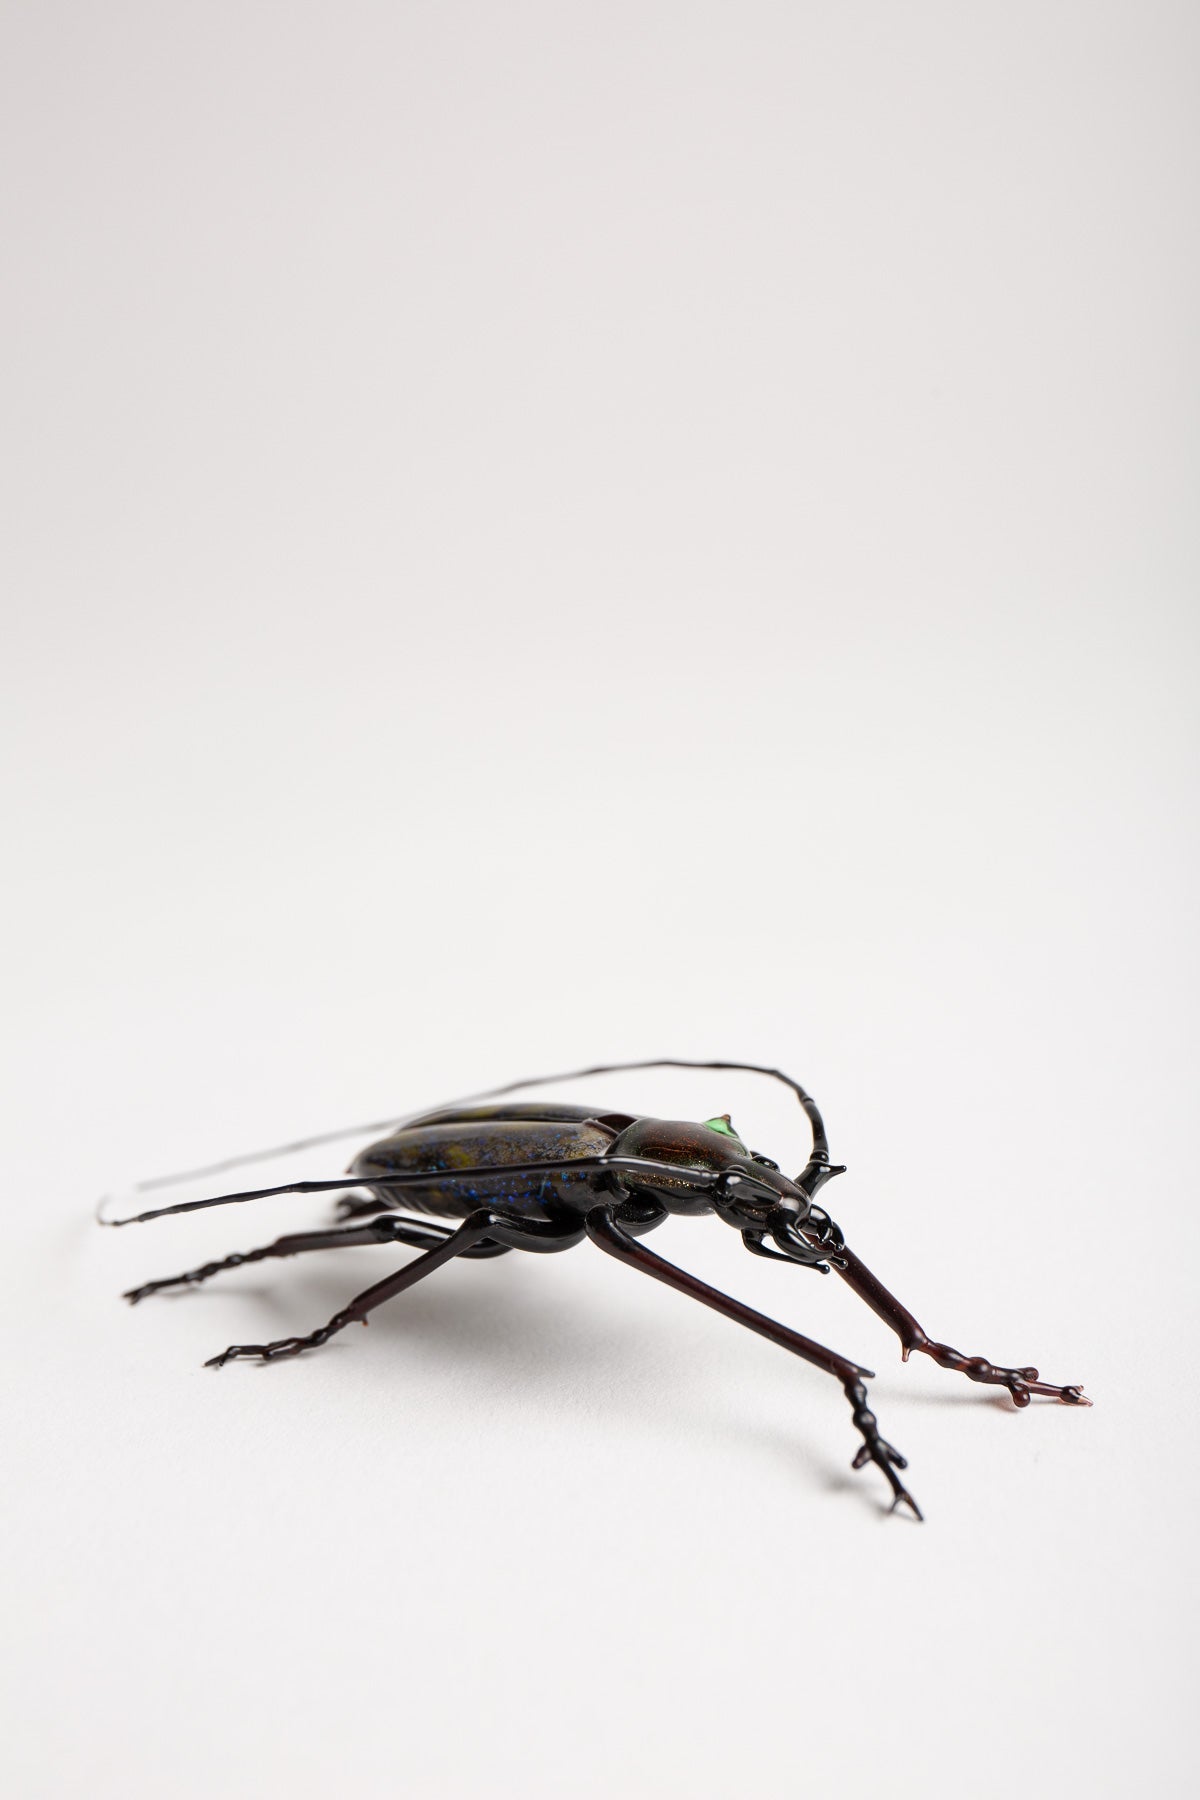 MAXFIELD PRIVATE COLLECTION | LONG HORNED BEETLE